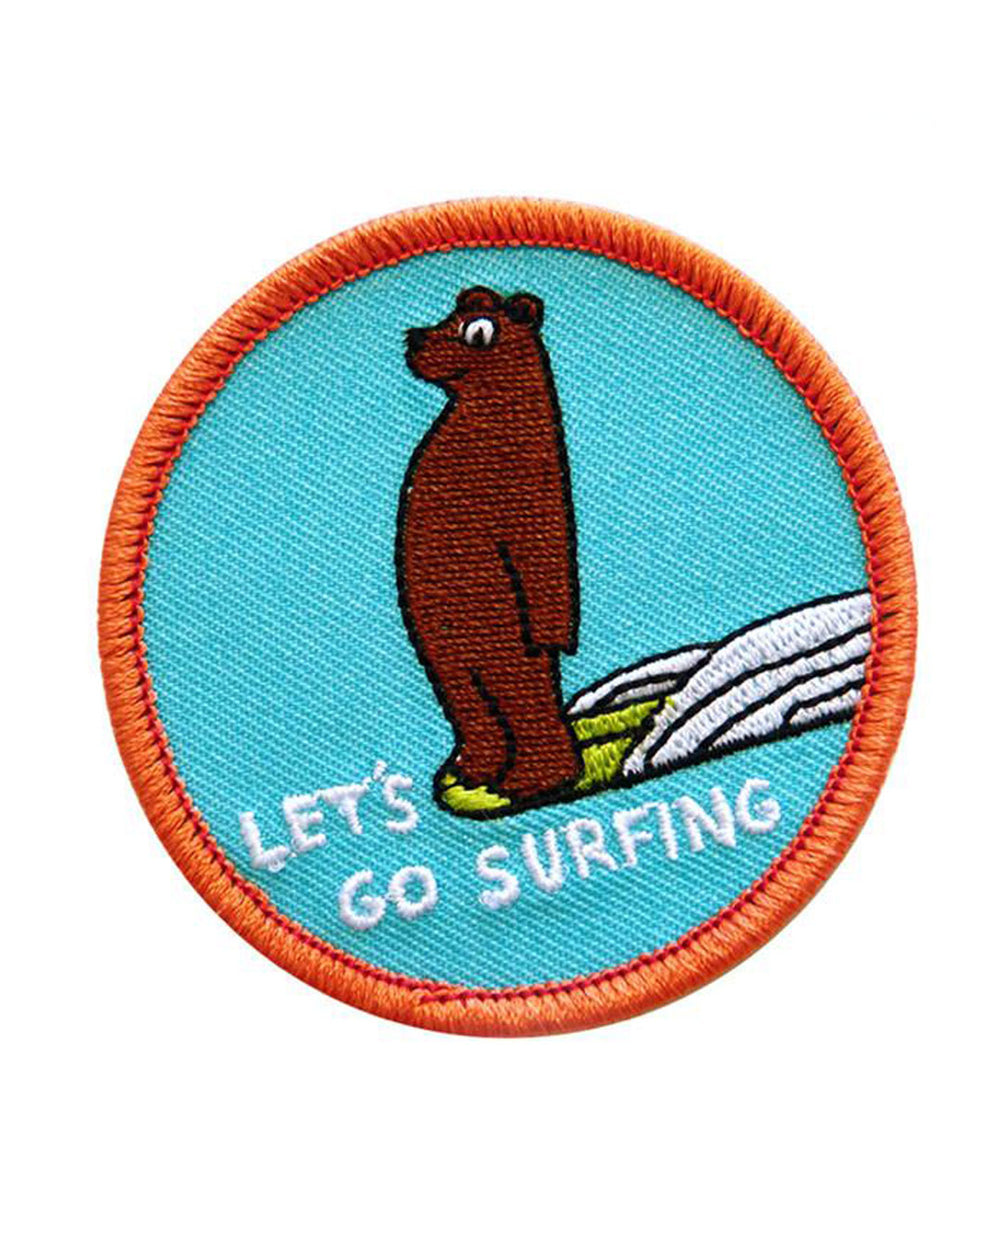 Let's Go Surfing Embroidered Patch